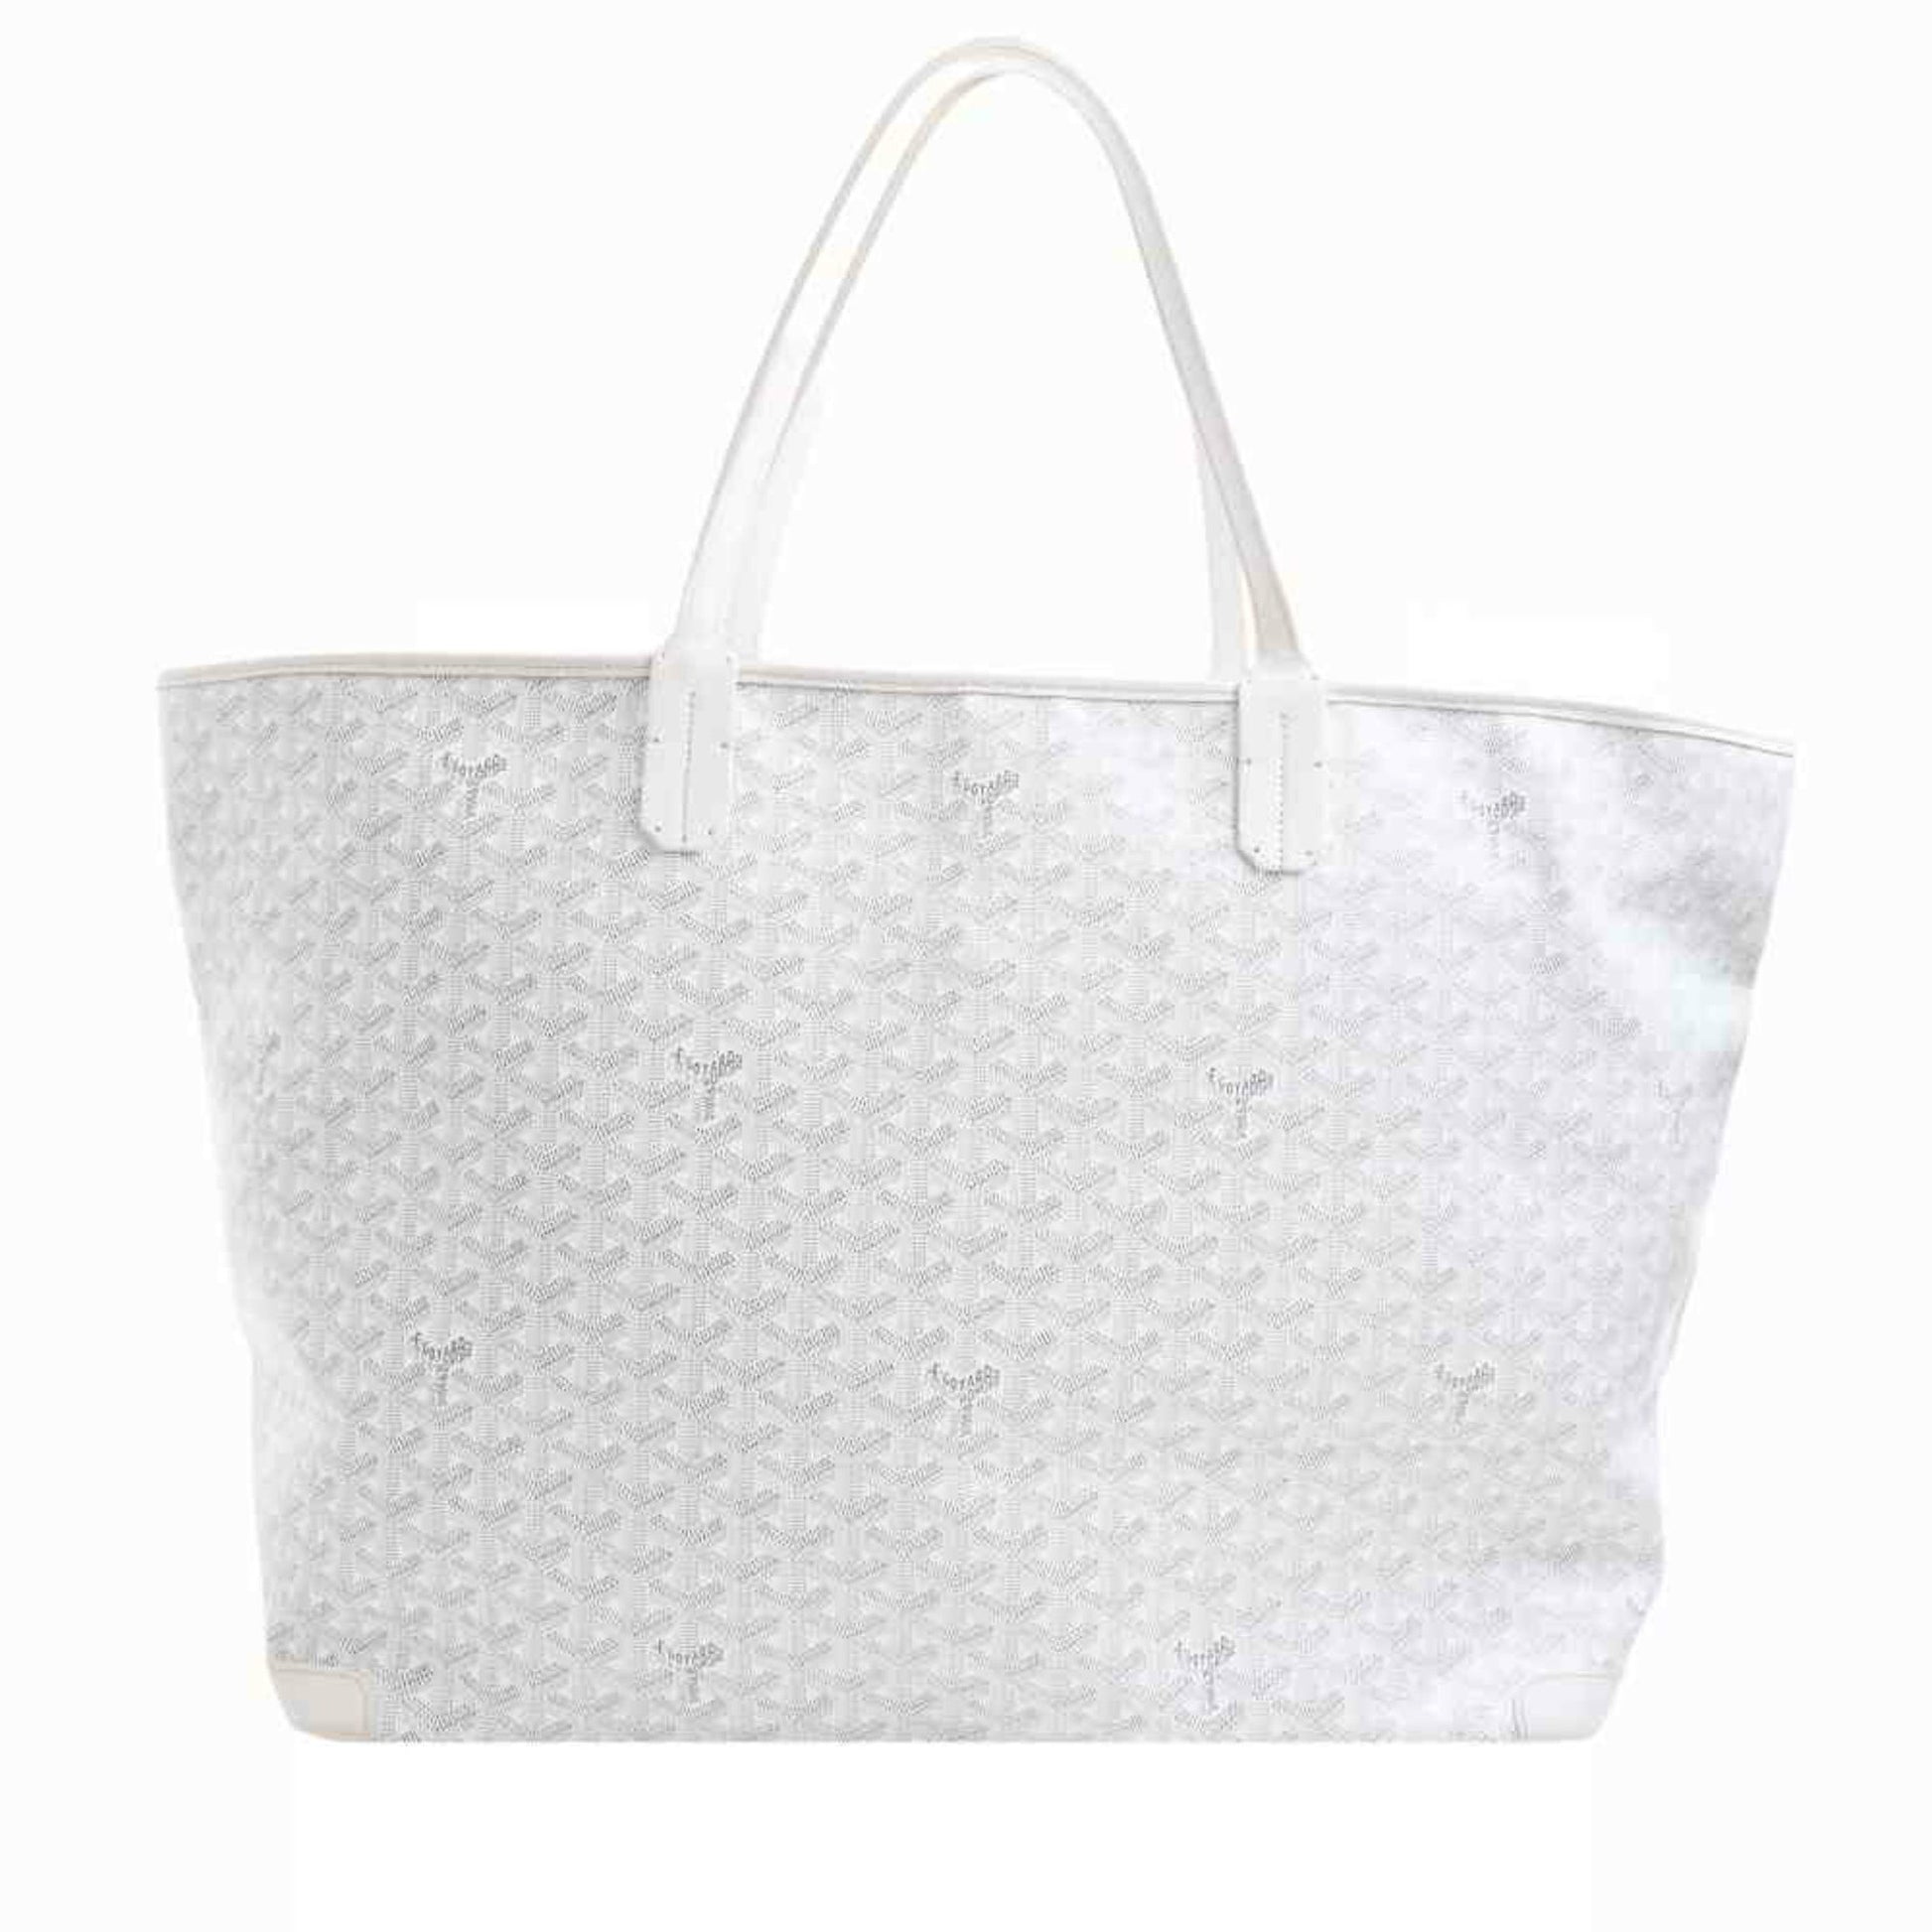 Goyard - Artois Tote Bag (PM size) - All you need to know! 